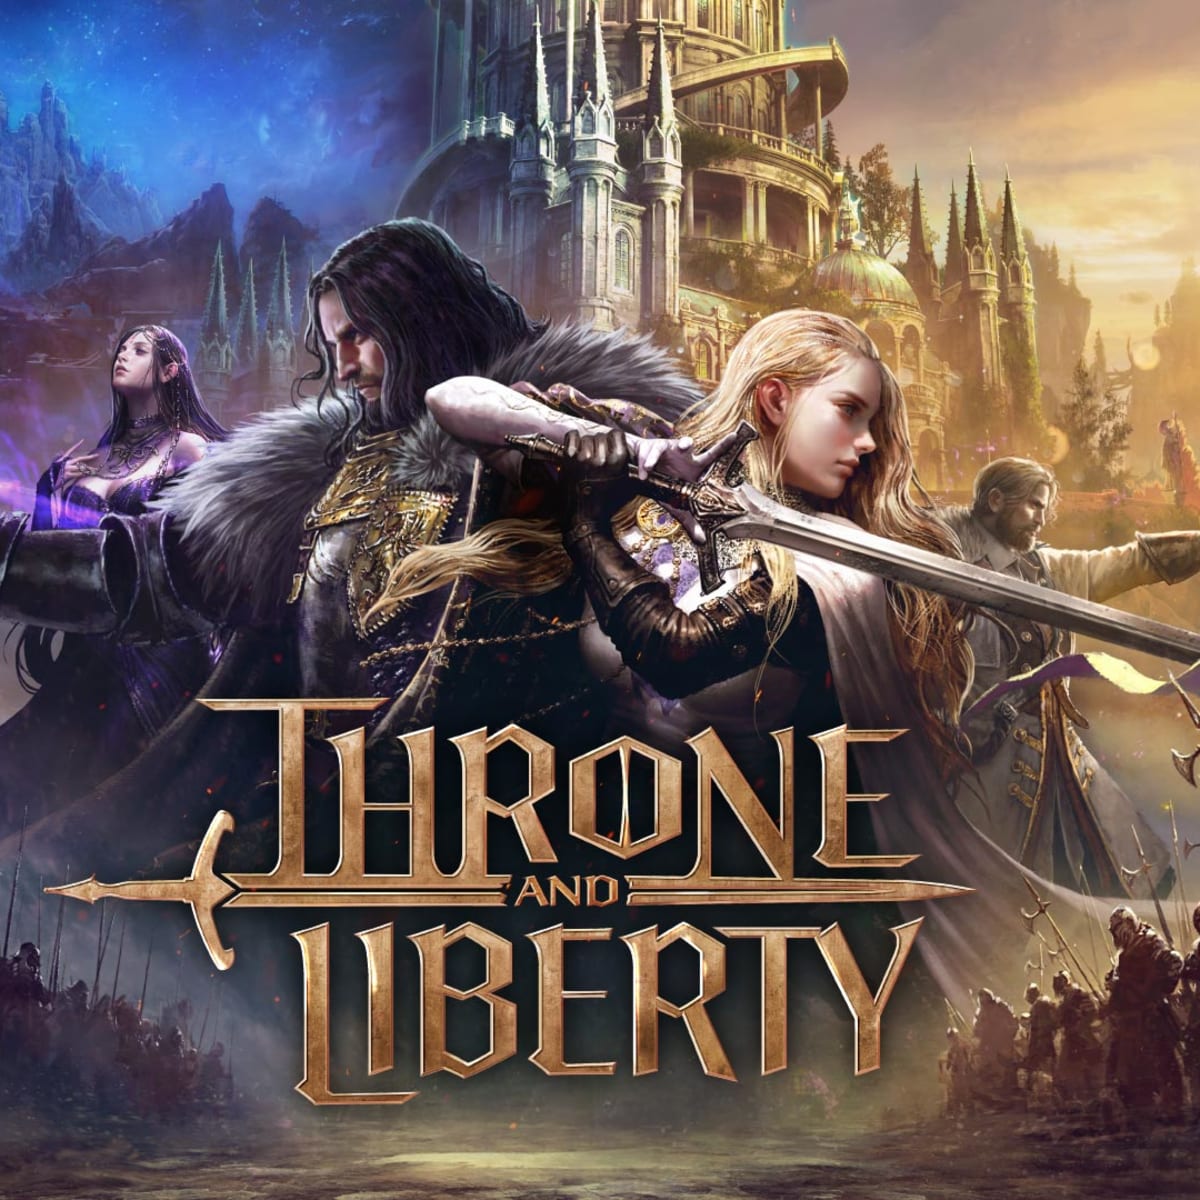 What Races can you play in Throne and Liberty? TL MMO - AlcastHQ